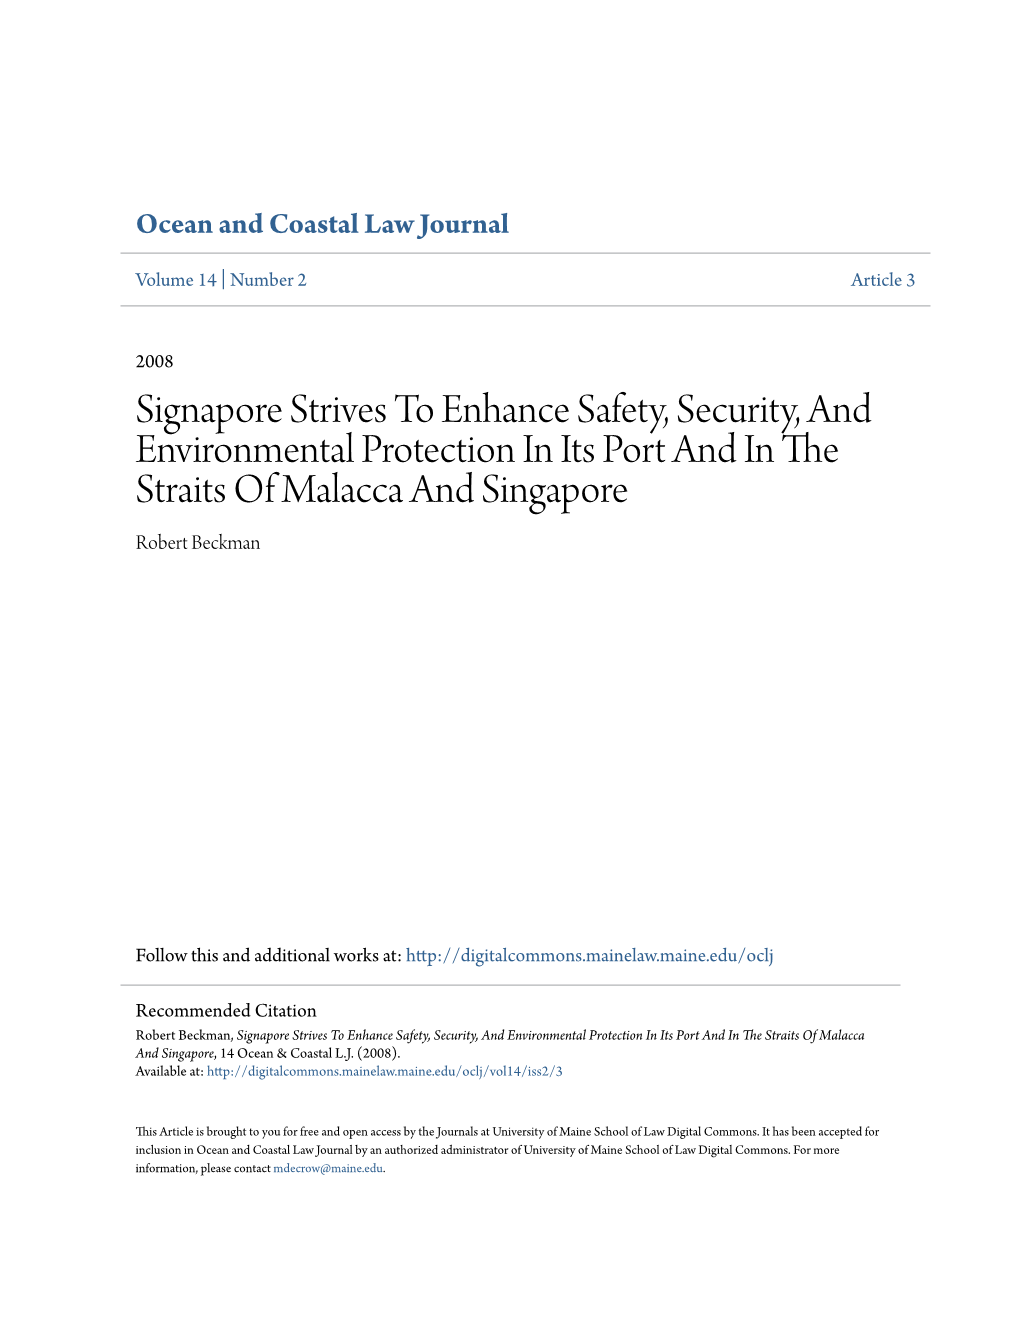 Signapore Strives to Enhance Safety, Security, and Environmental Protection in Its Port and in the Straits of Malacca and Singapore Robert Beckman